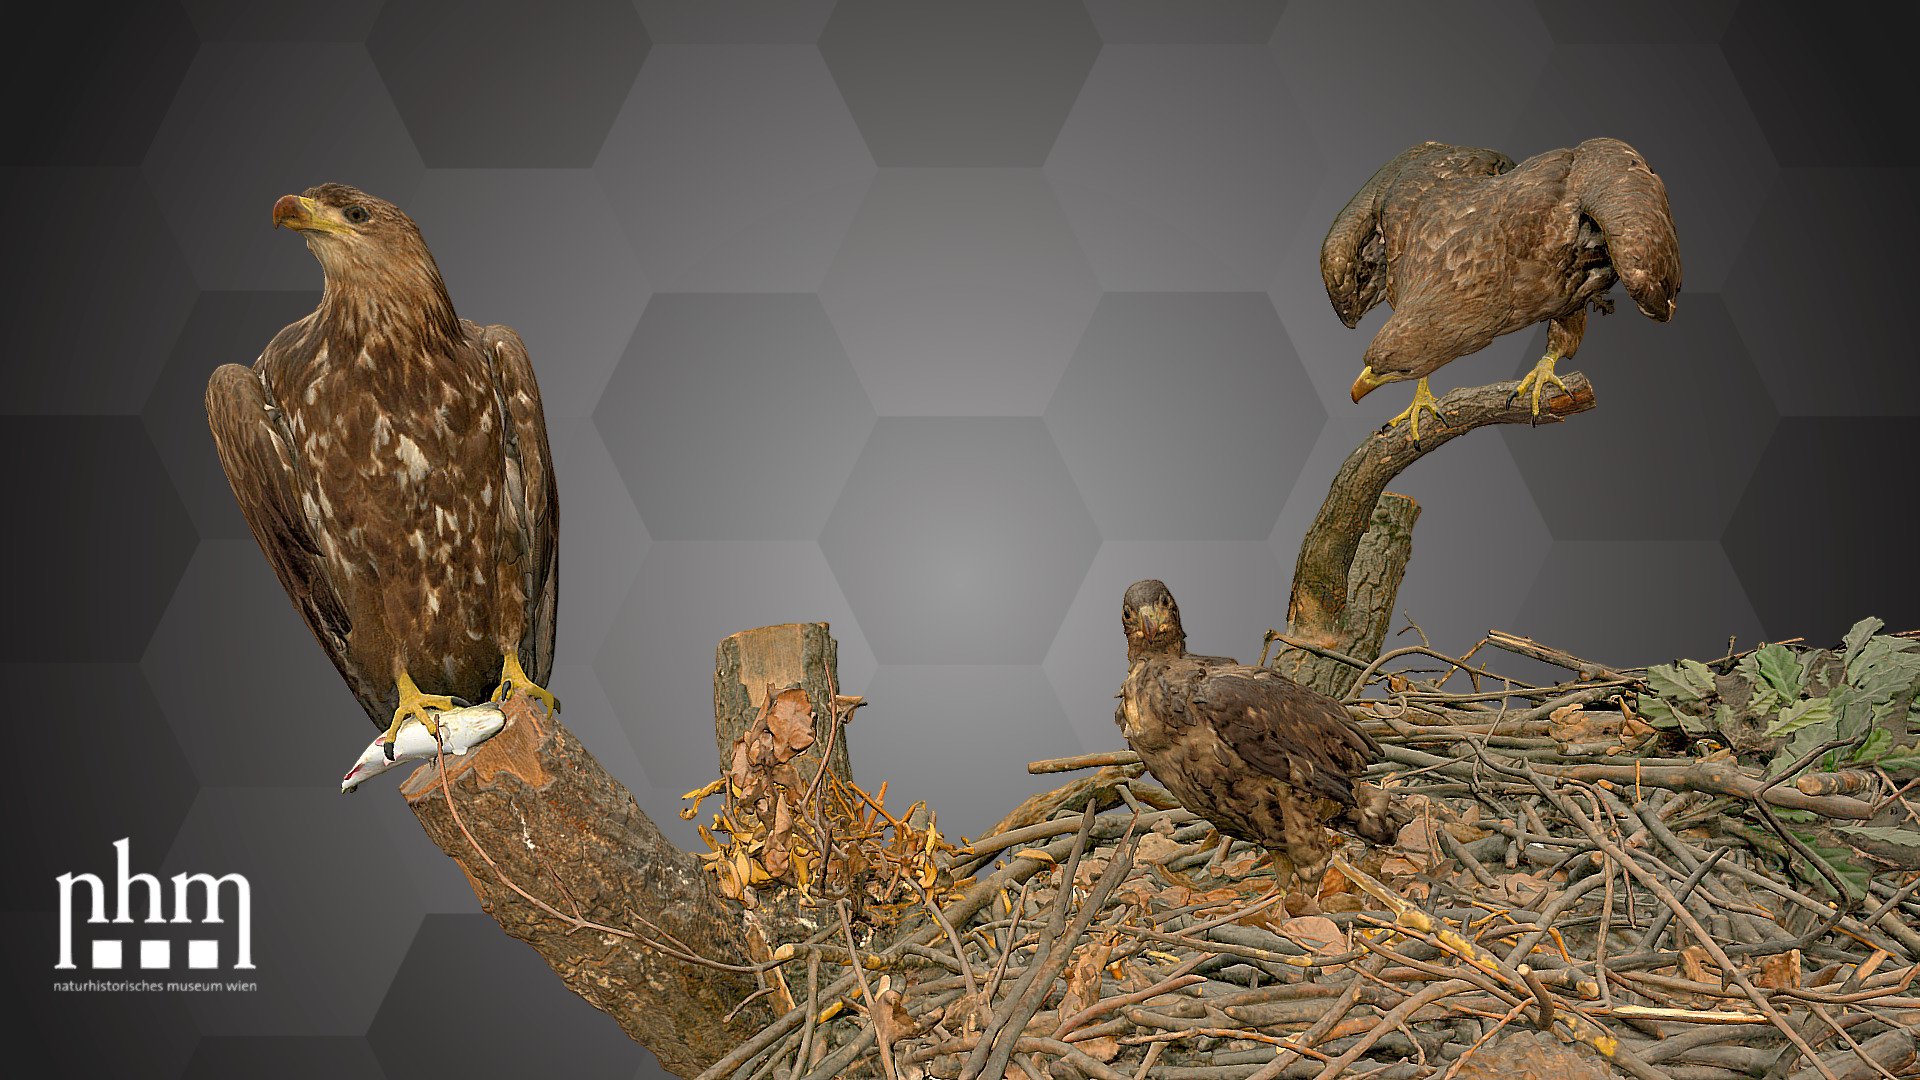 3D scan of the mounted white-tailed eagle pair (Haliaeetus albicilla) from the Danube wetlands near Vienna. These birds were bagged by Crown Prince Rudolf on the 22nd of January 1889, only nine days before he committed suicide in Mayerling, Austria. The nest of the white-tailed eagles called eyrie can be as tall as four meters and is often used for many years.

The white-tailed eagle pair with a fledgling at the center is Number 74 of the NHM Top 100 and can be found in Hall 29 of the NHM Vienna.

Specimen: Haliaeetus albicilla (Linnaeus, 1758)

Inventory number: NHMW-Zoo-VS 37.779 &amp; 37.781

Collection: Natural History Museum Vienna, 1st Zoological Dept., Bird Coll. (curator: Swen Renner)

Find out more about the NHMW here.

Scanned and edited by Anna Haider (NHMW)

Scanner: Artec Leo. Infrastructure funded by the FFG 3d model